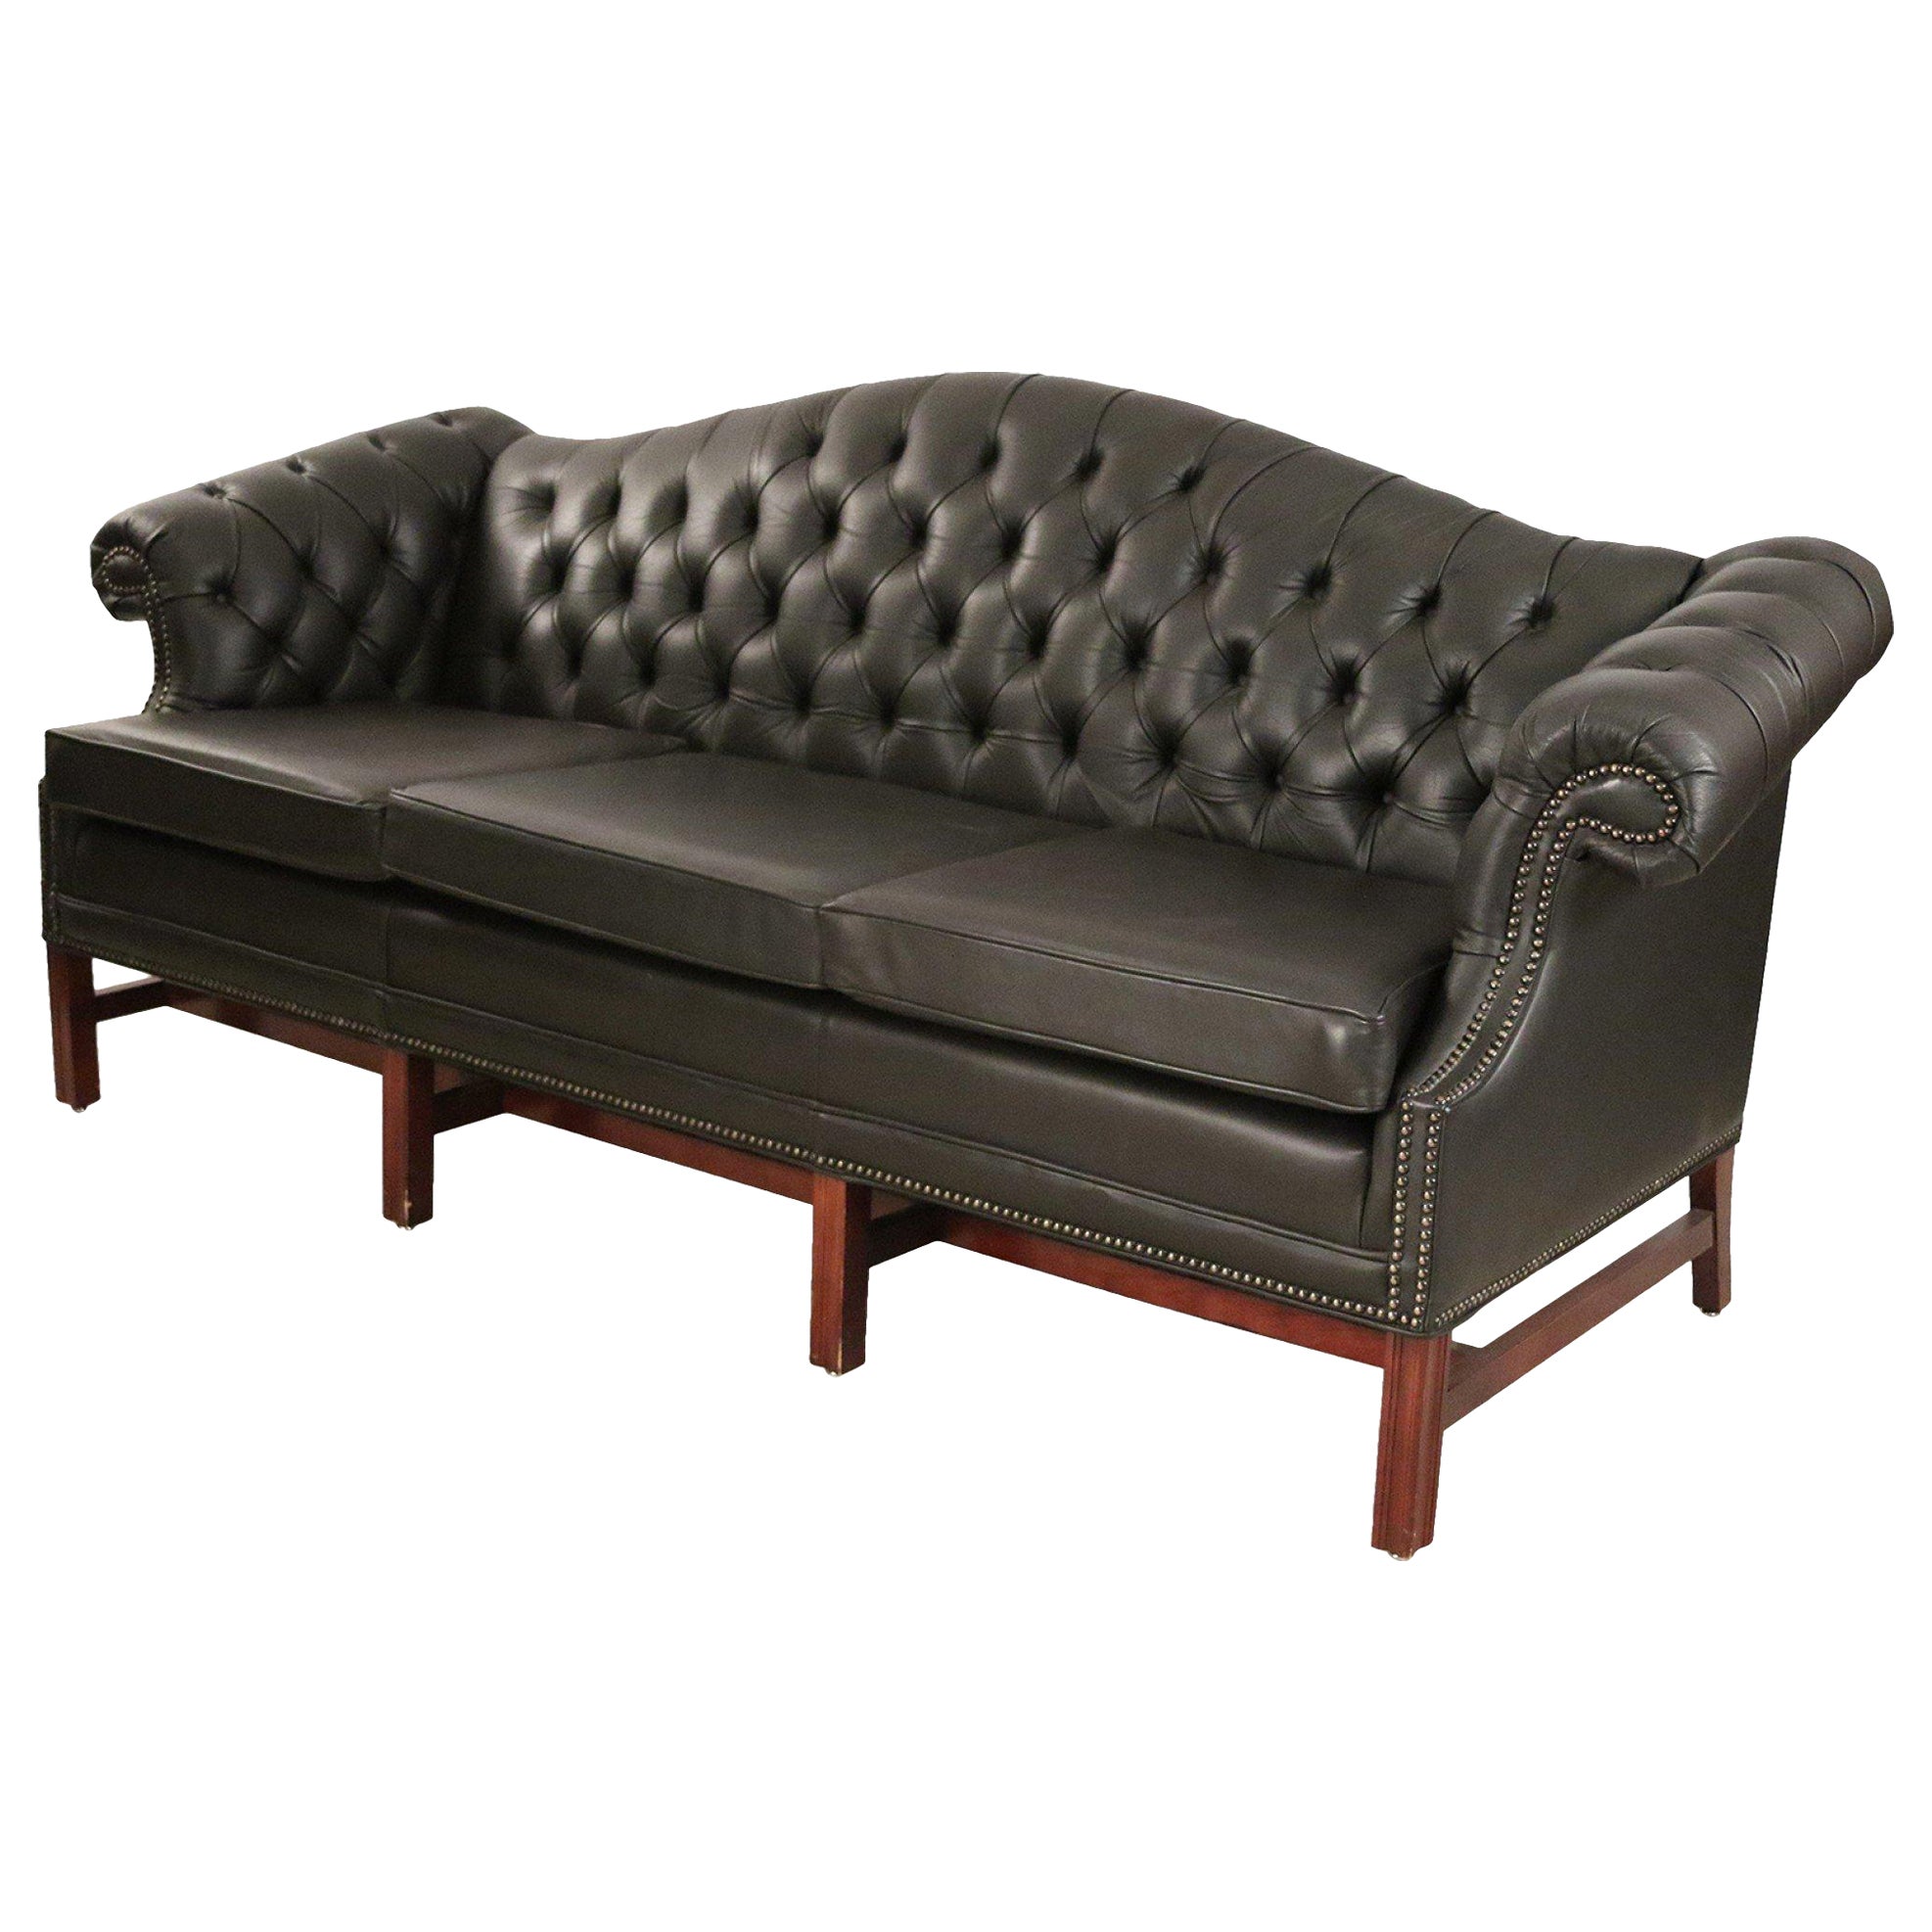 English Victorian Style Camel Back Black Tufted Leather Sofa For Sale